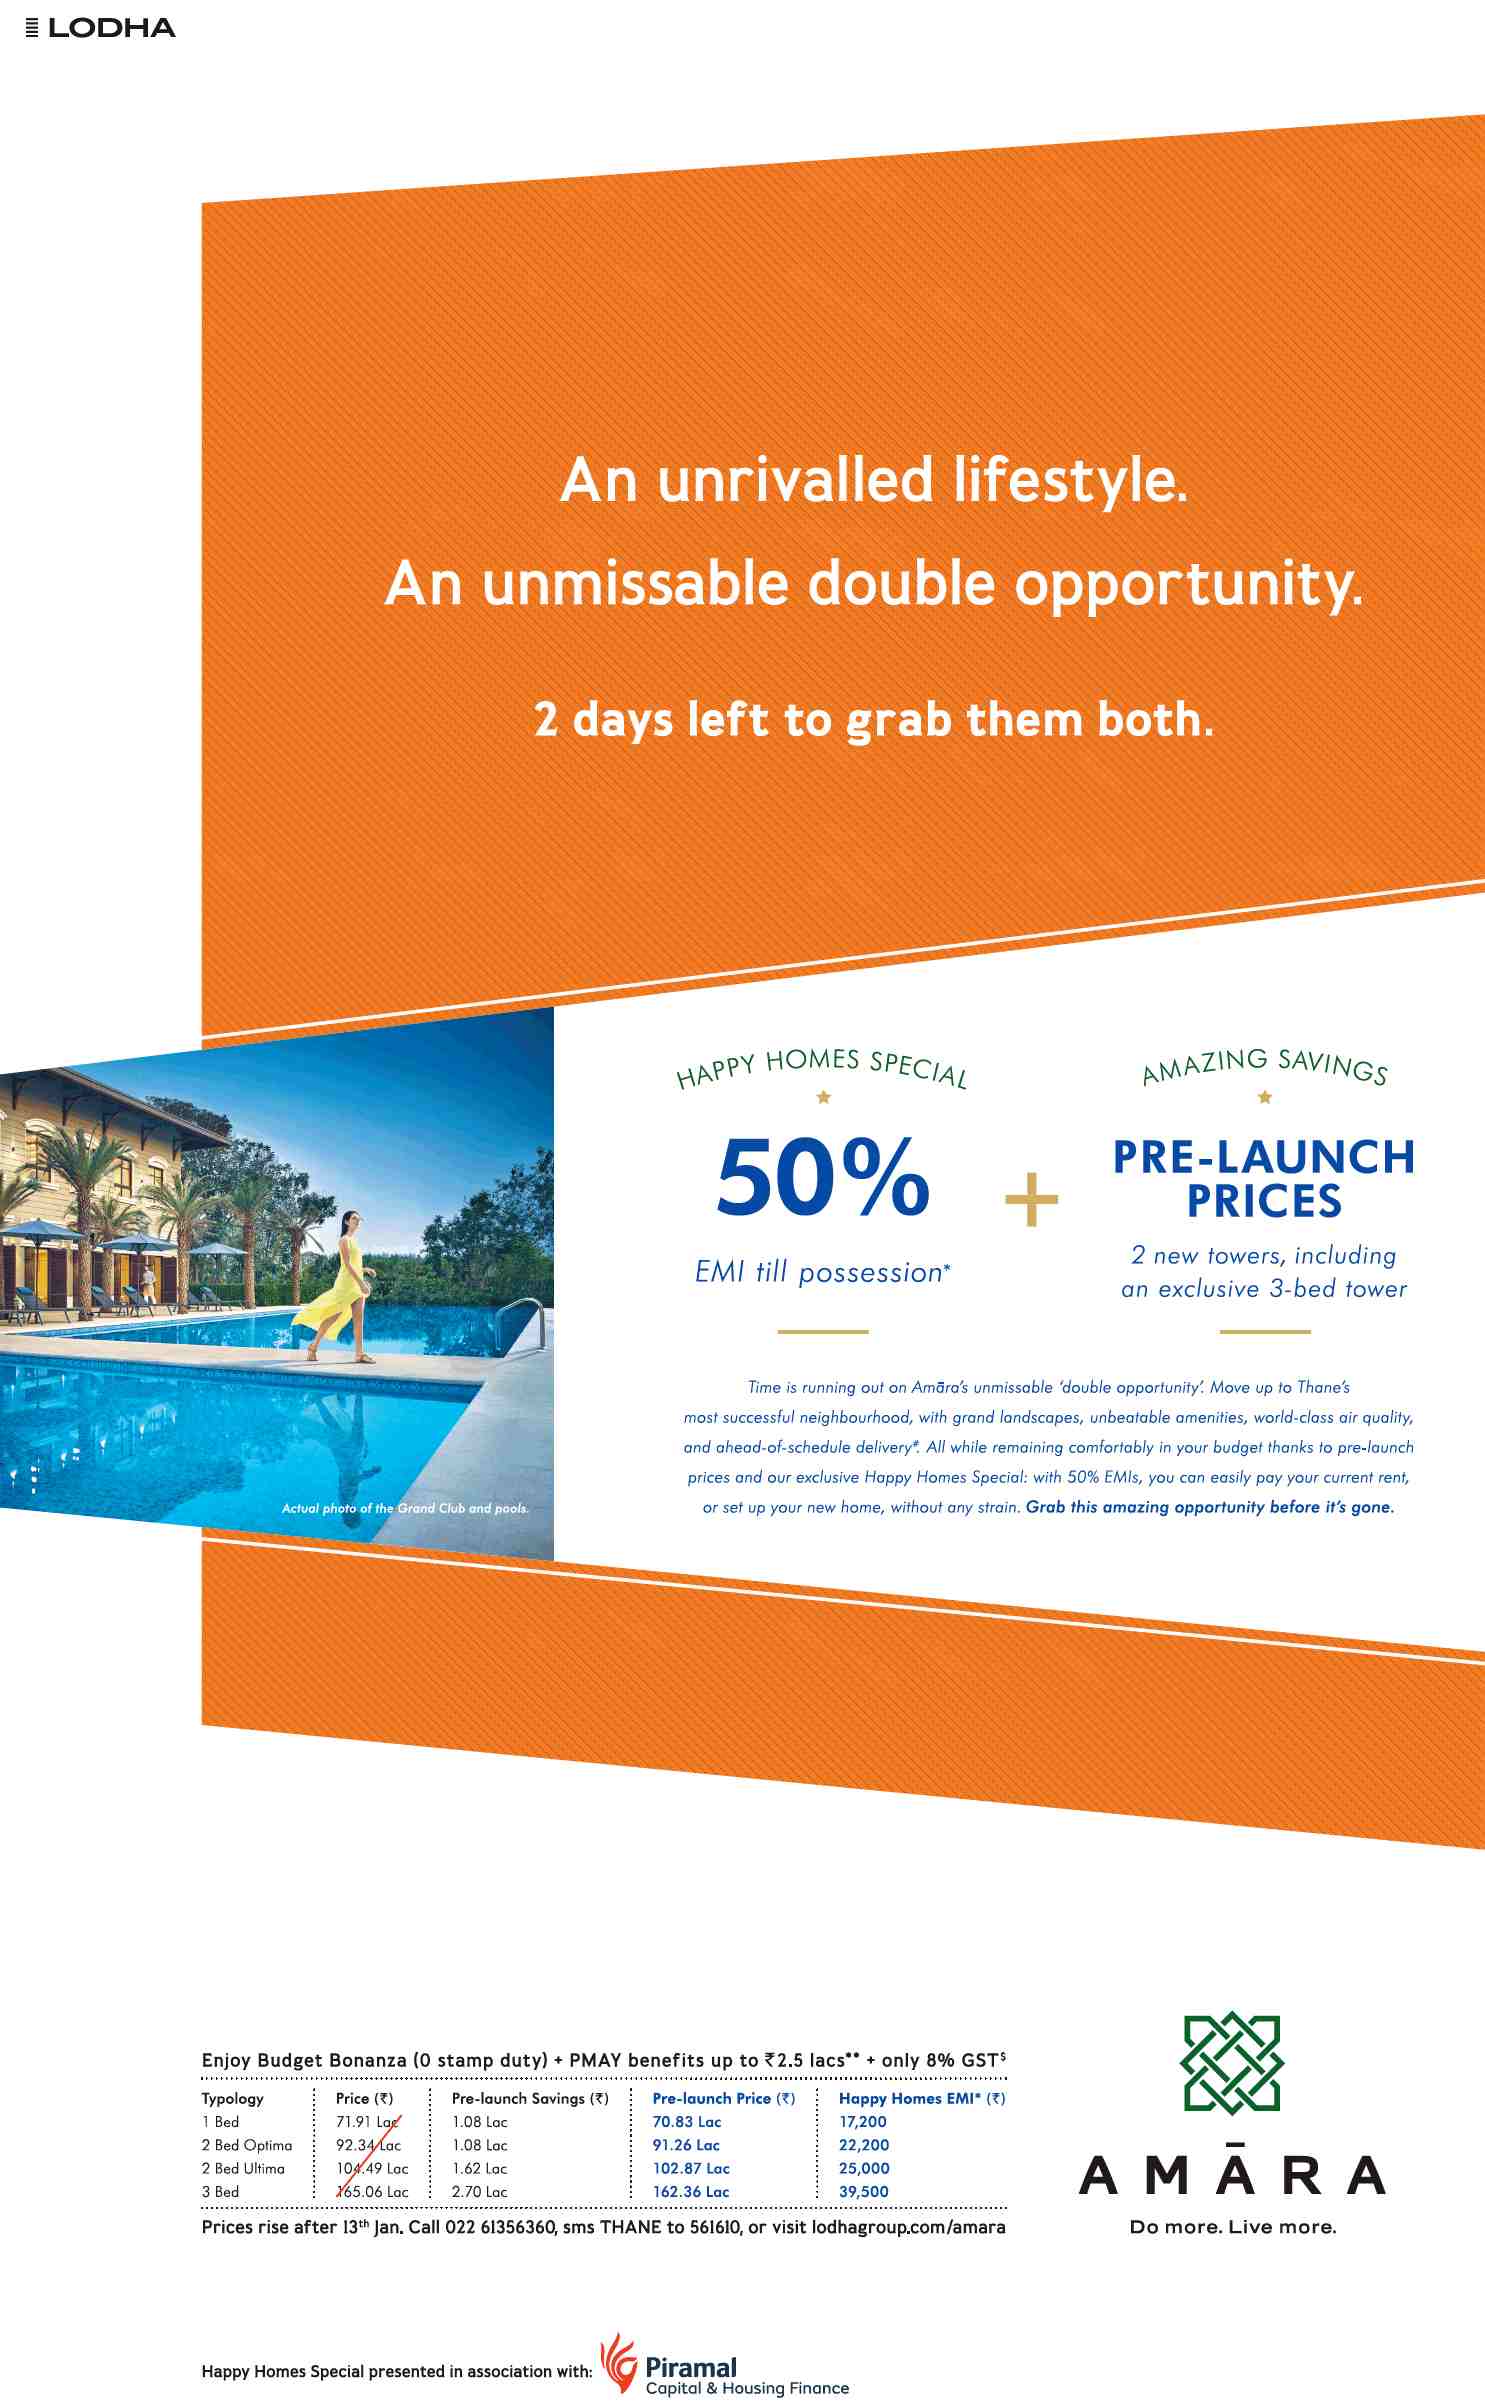 Avail happy homes special 50% EMI till possession offer at Lodha Amara in Mumbai Update